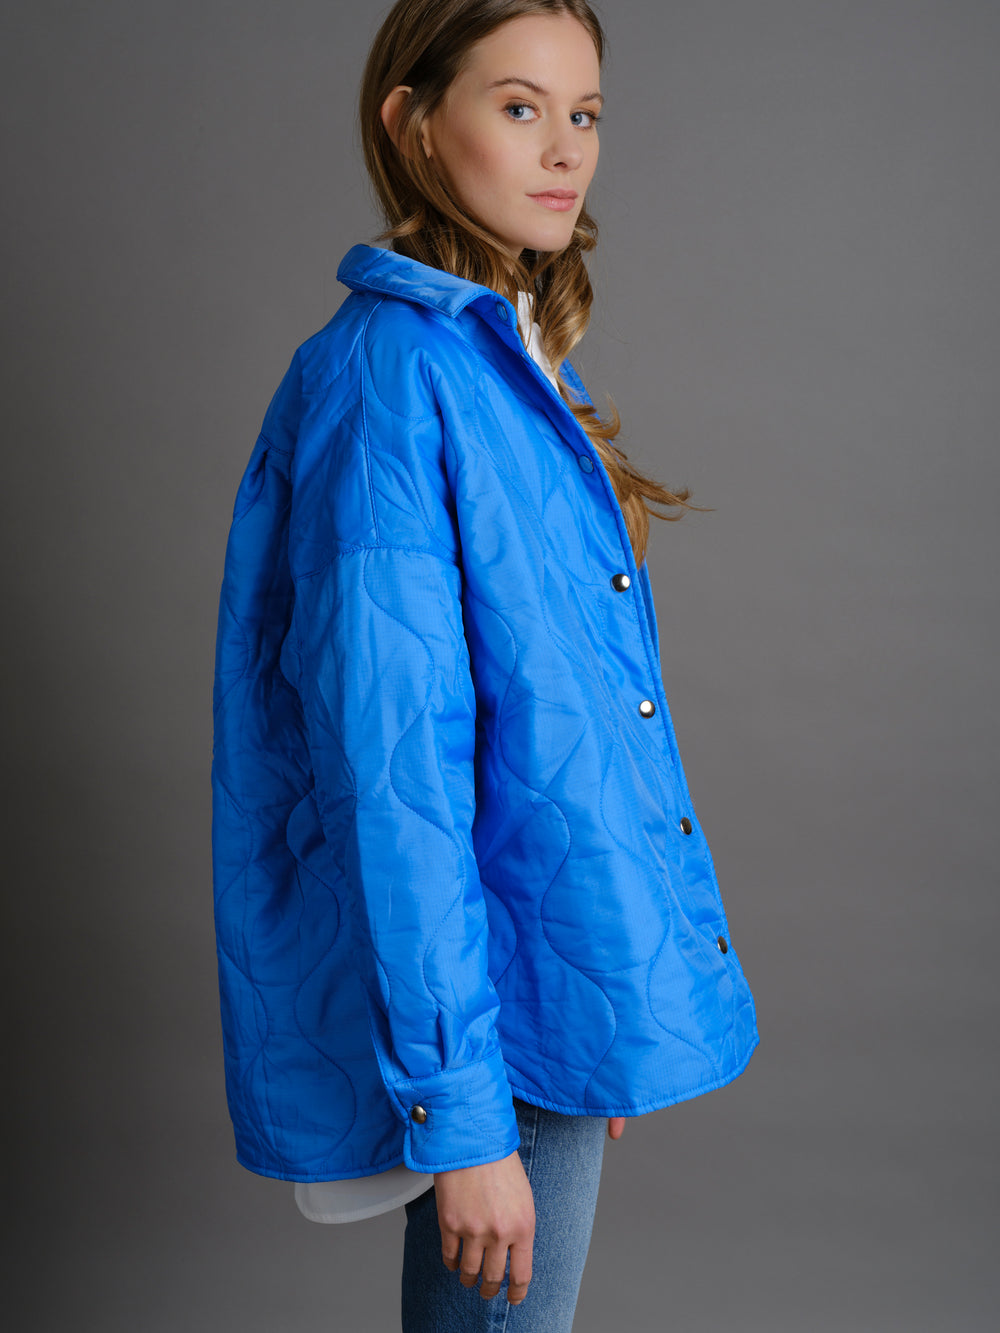 Azure Blue Quilted Jacket